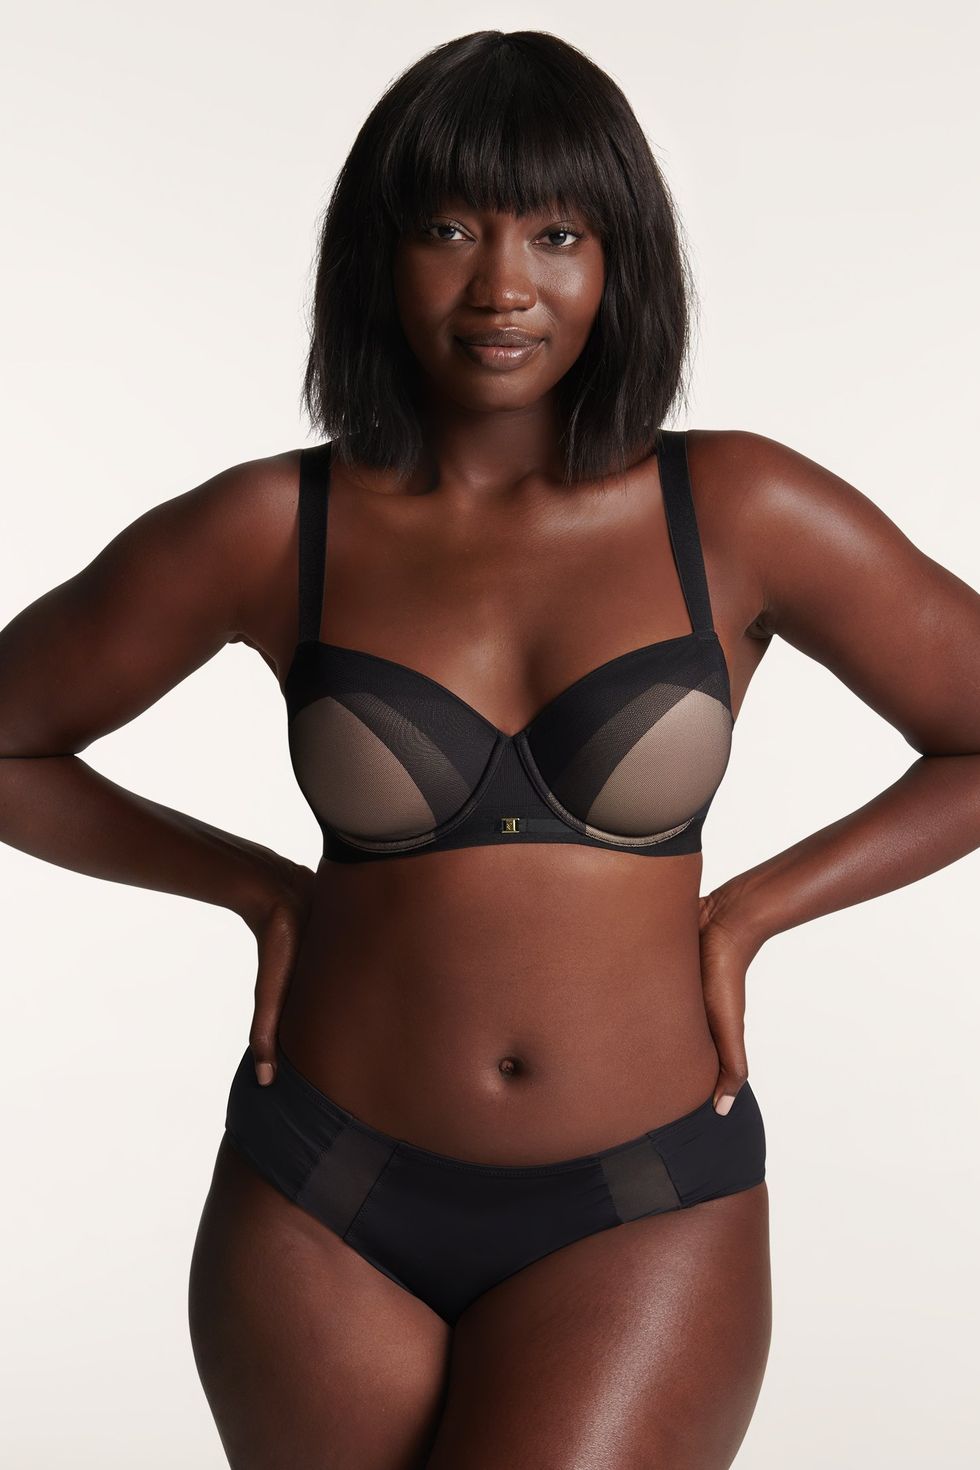 ThirdLove - Our newest bra isn't anything to mesh with! Hannah is looking  like she is about to make some power moves in our *new* Ombre Mesh Demi Bra  in Black. #NewRelease #